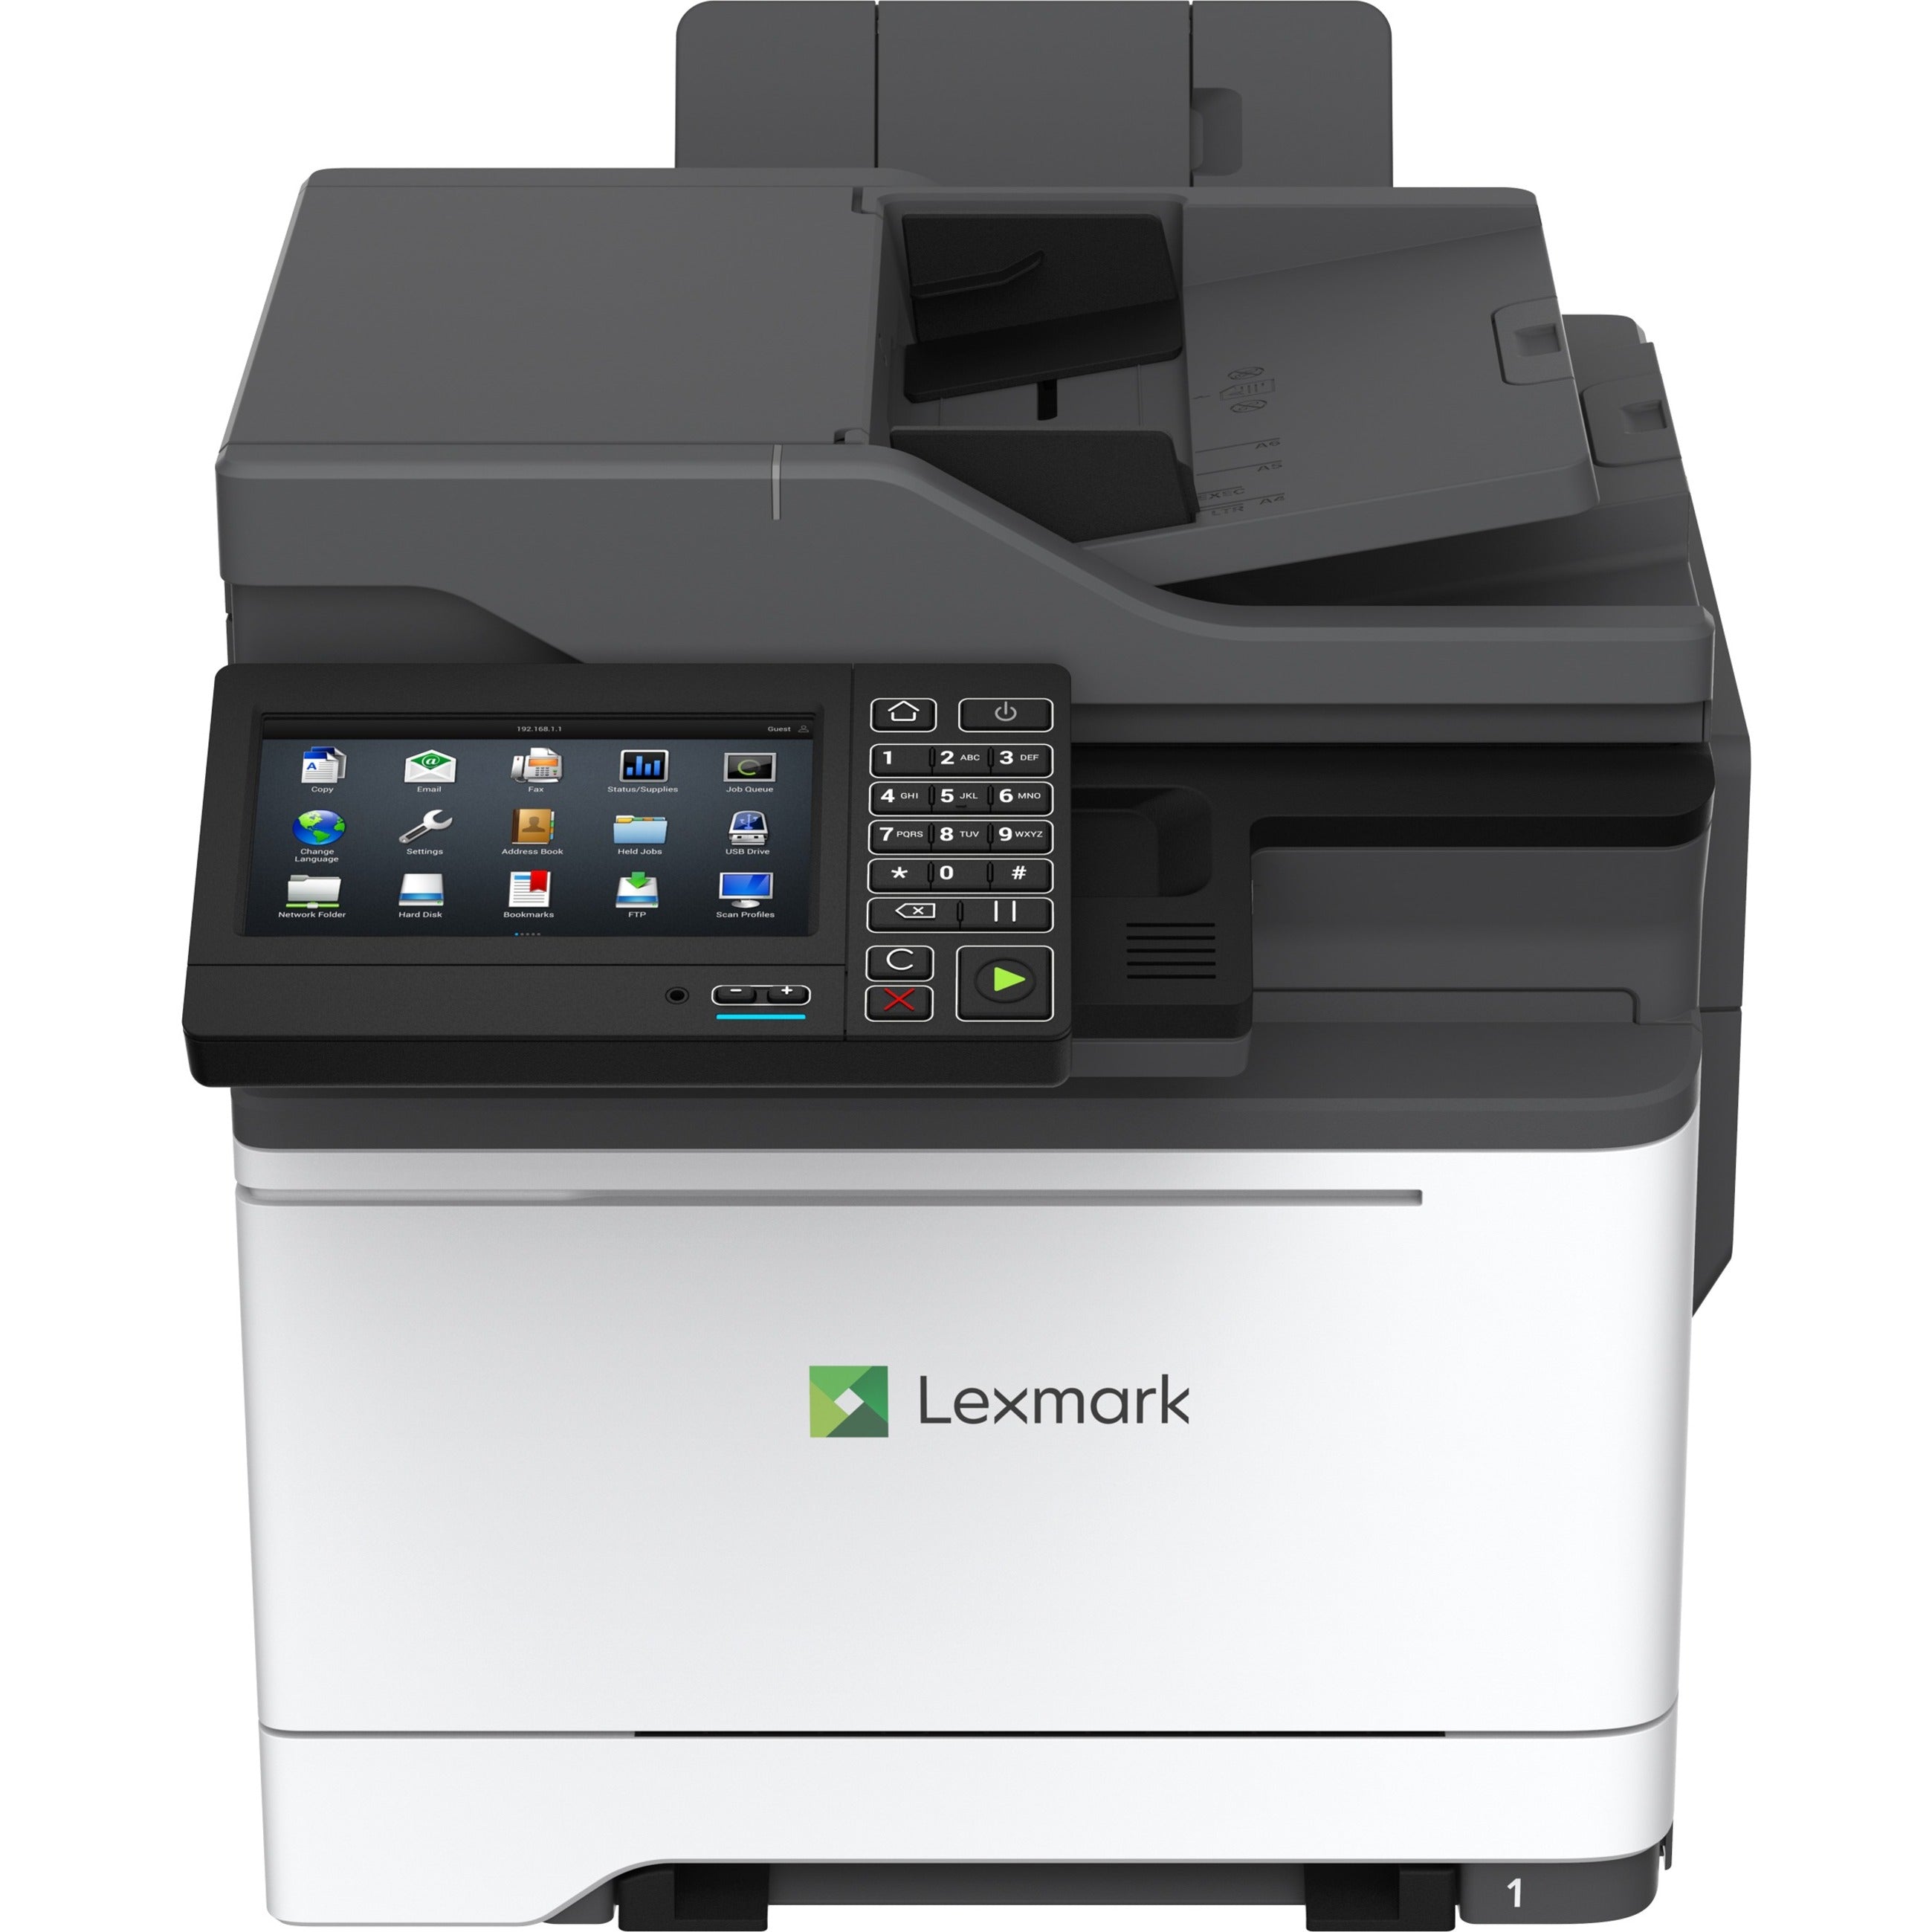 Lexmark 42CT781 CX625ade Color Laser Multifunction Printer, Automatic Duplex Printing, 40 ppm Print Speed, 2400 x 600 dpi Resolution